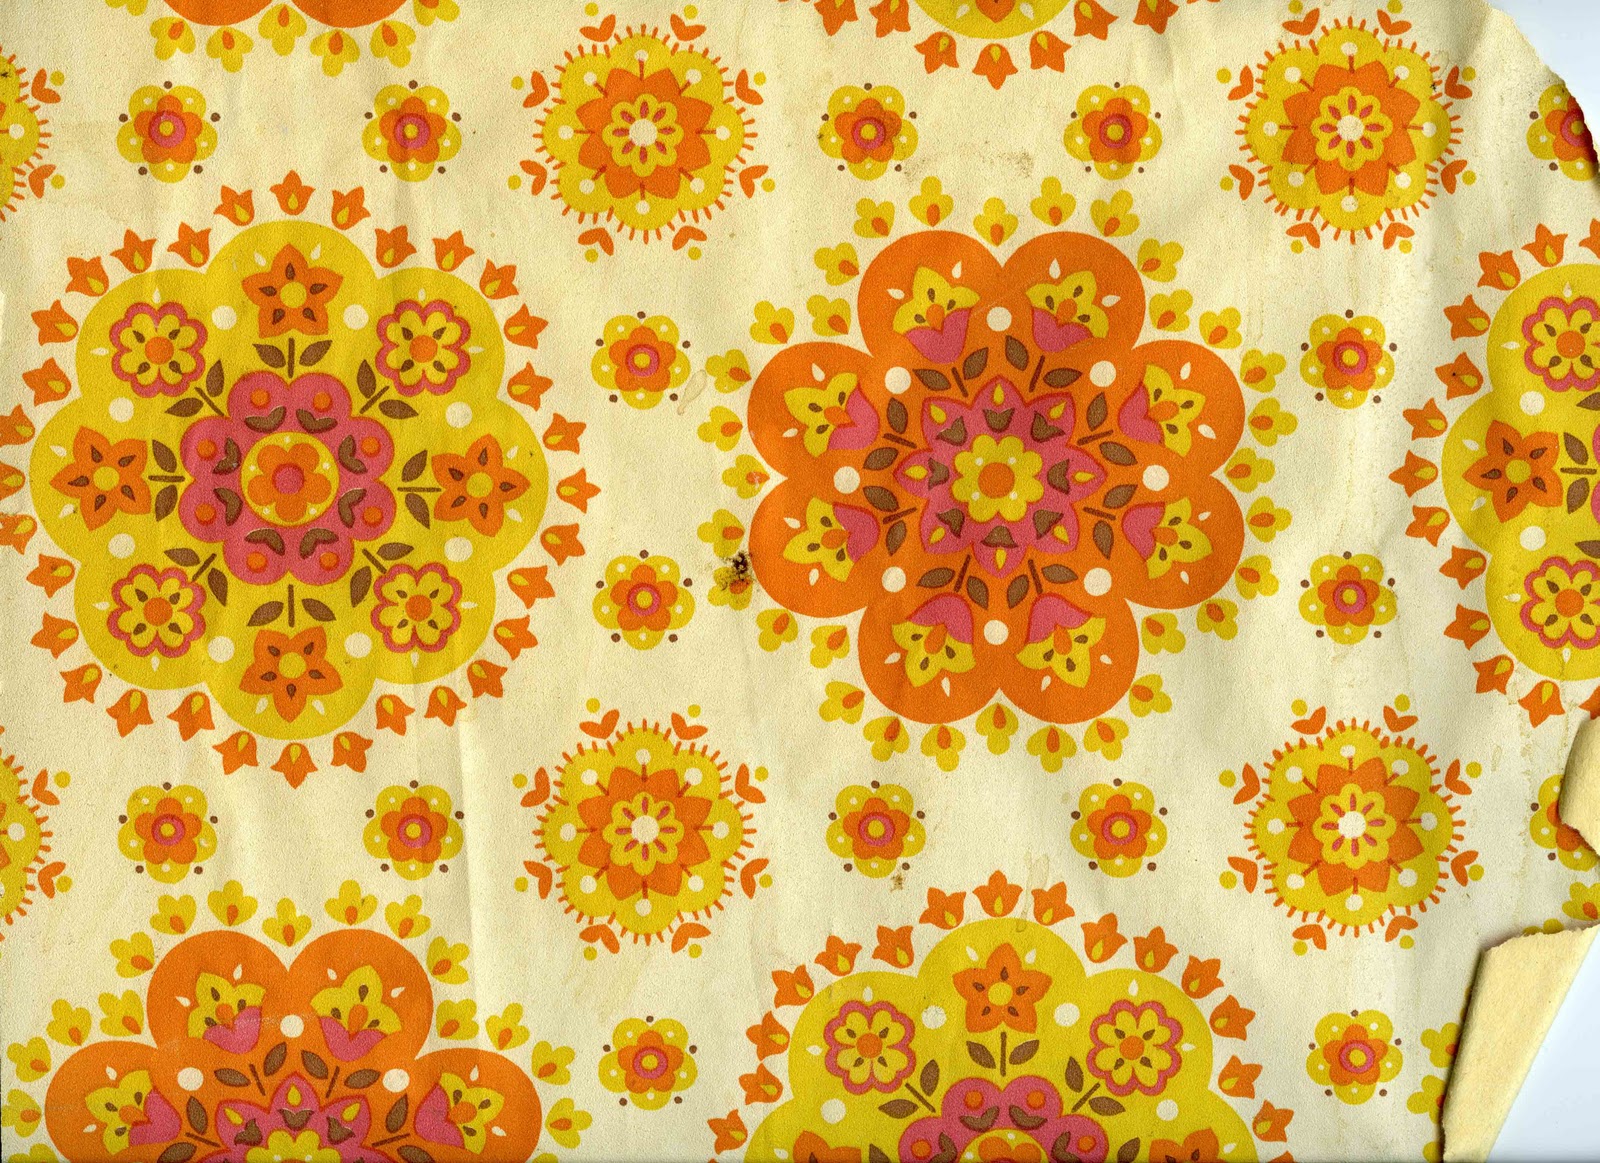 A Good Piece Of 60s Or 70s Wallpaper Can Liven Up Any Day